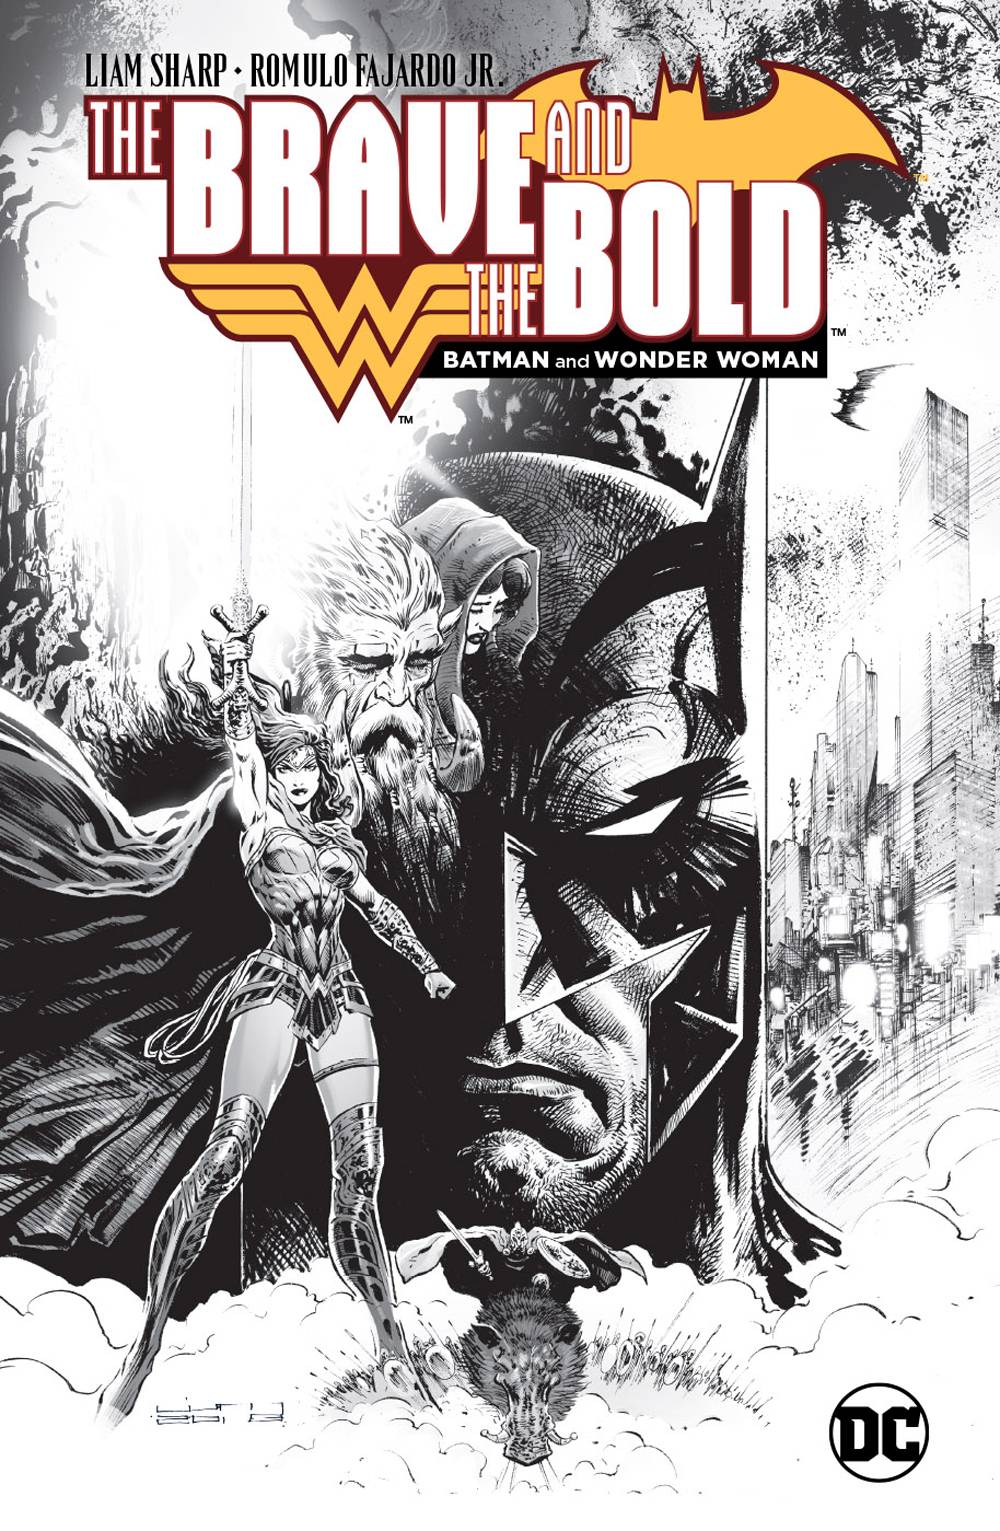 JUL189253 - LCSD 2018 BRAVE AND THE BOLD BATMAN AND WONDER WOMAN HC -  Previews World